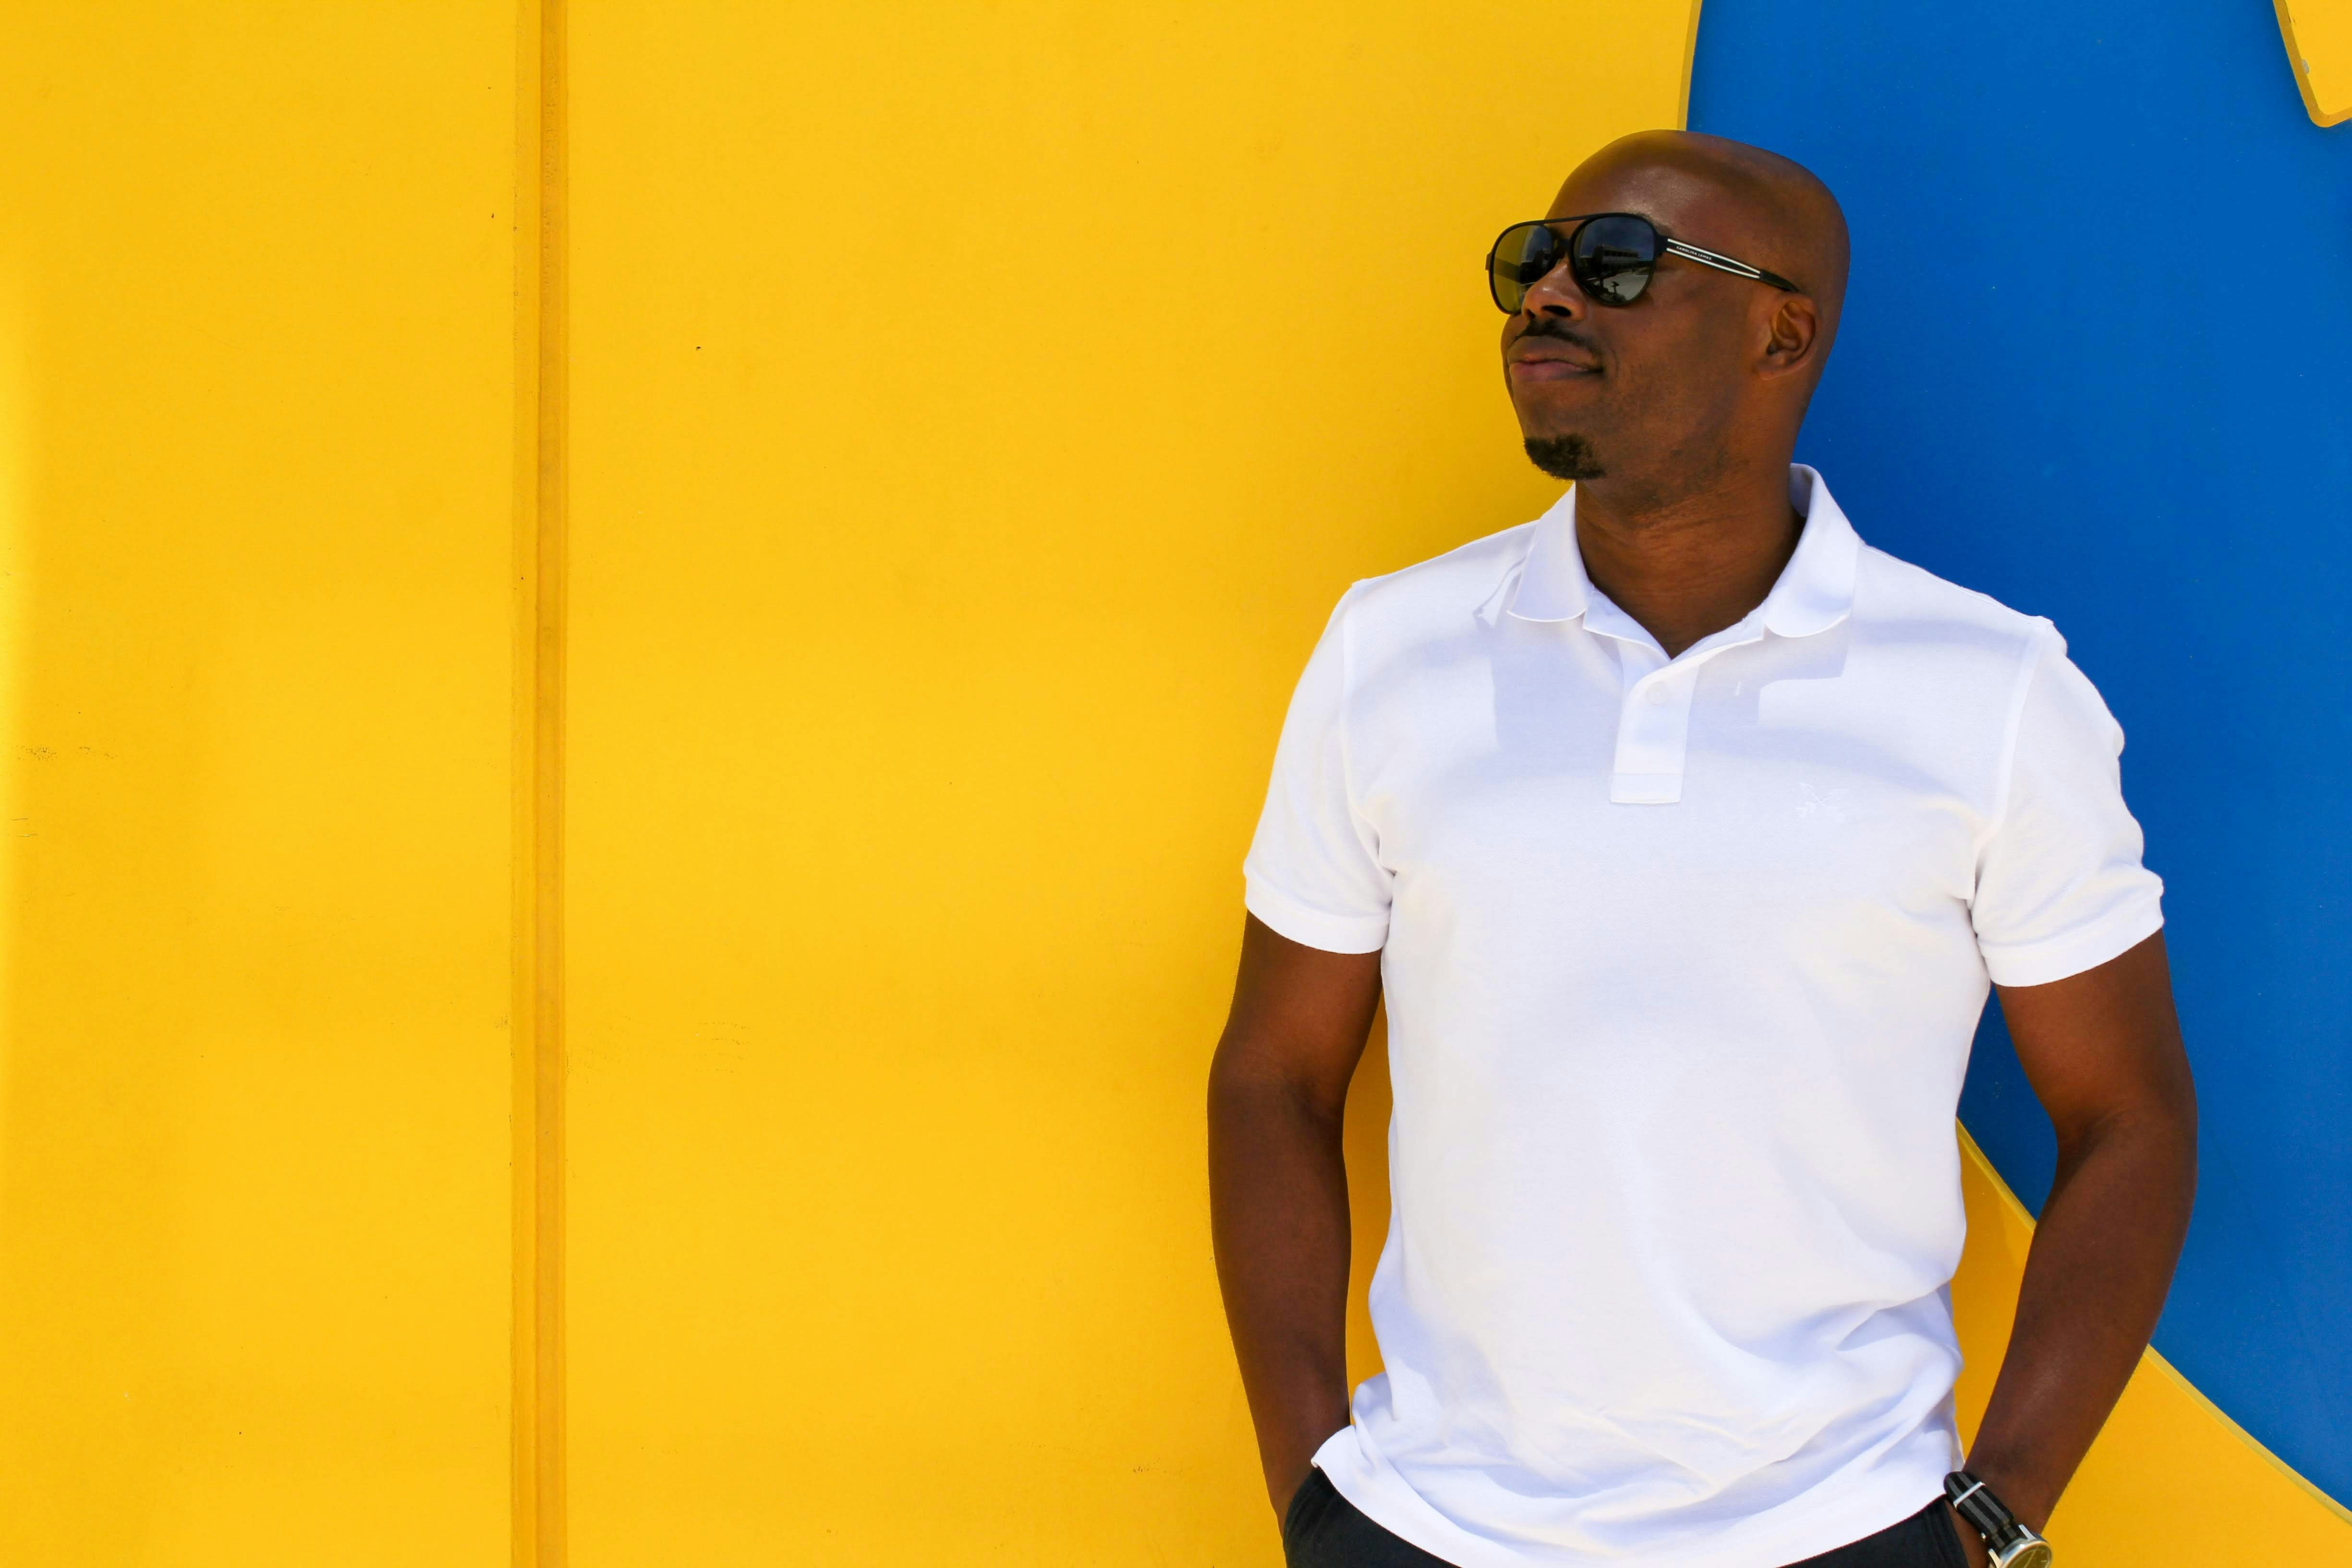 Black guy in front of a yellow wall